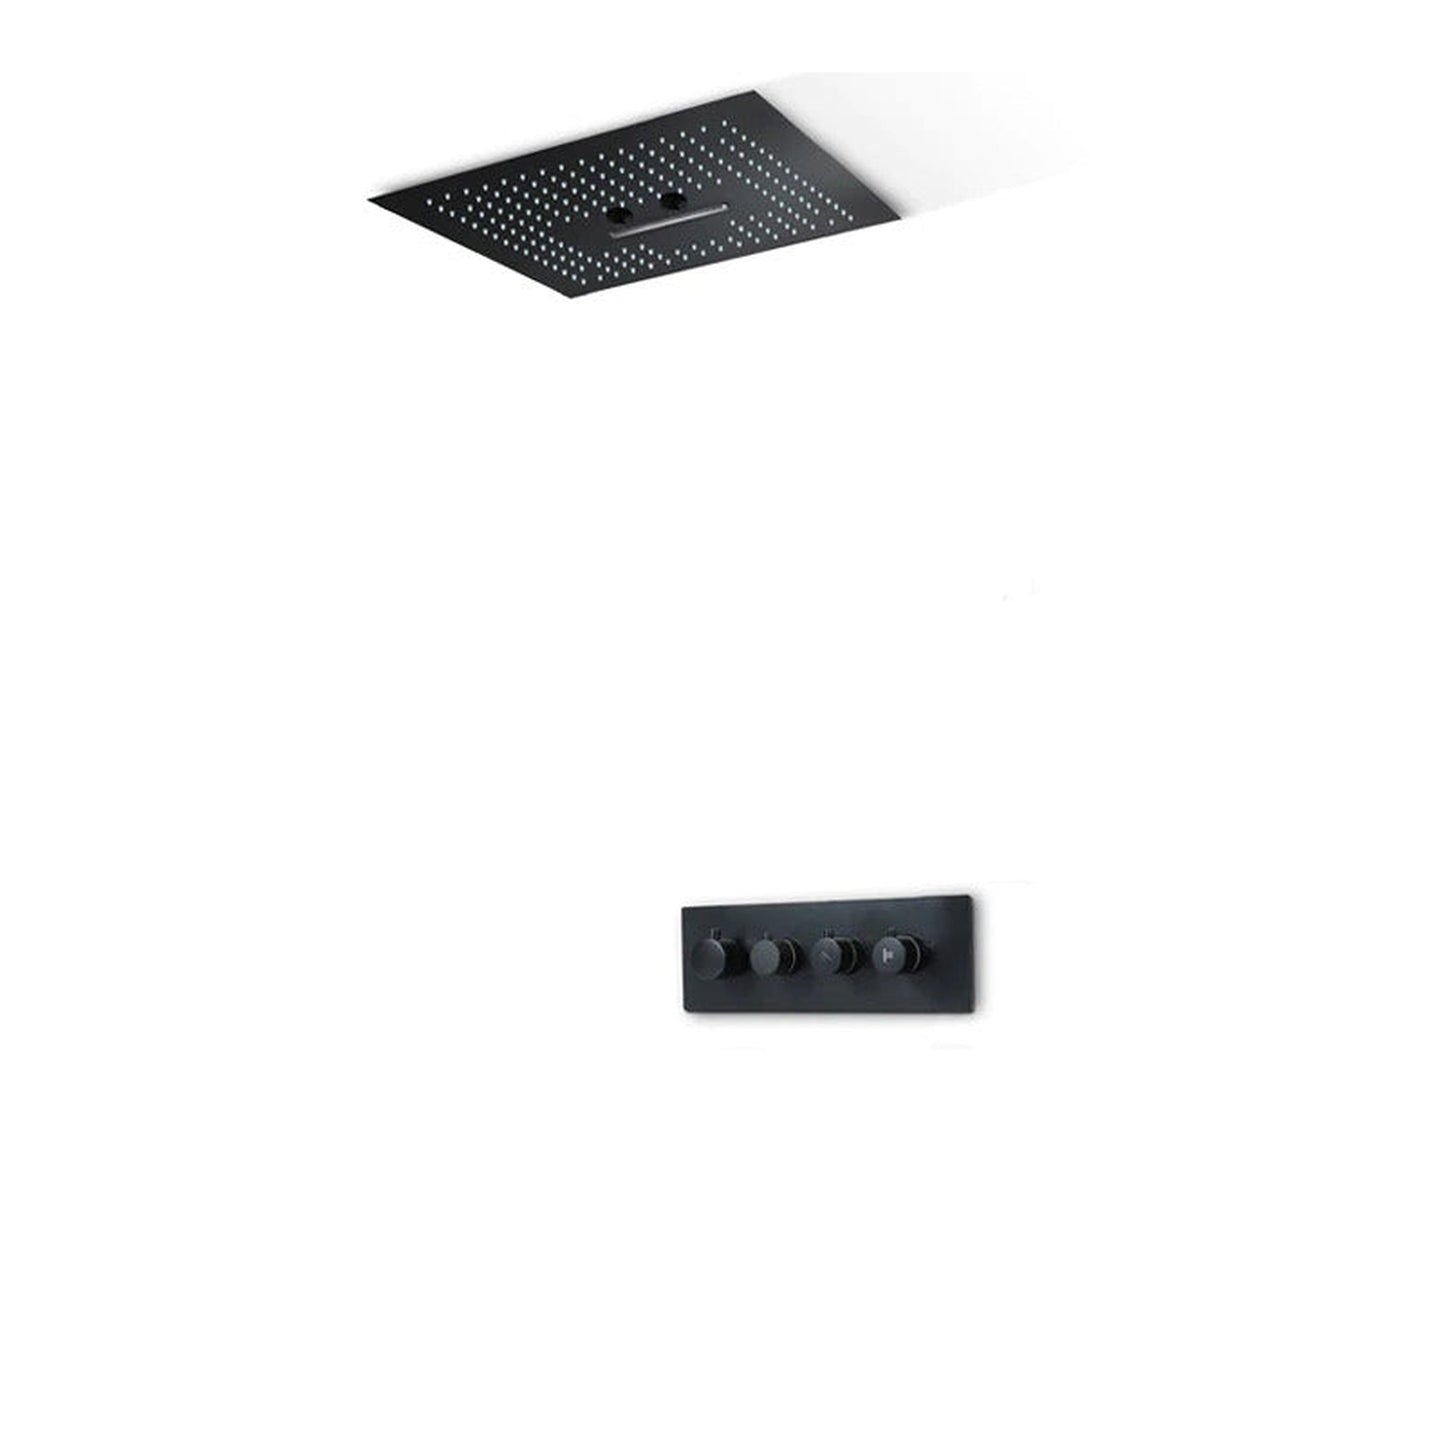 Fontana Dijon Matte Black Stainless Steel Ceiling Mounted Remote Controlled Smart LED Rainfall Waterfall Shower System